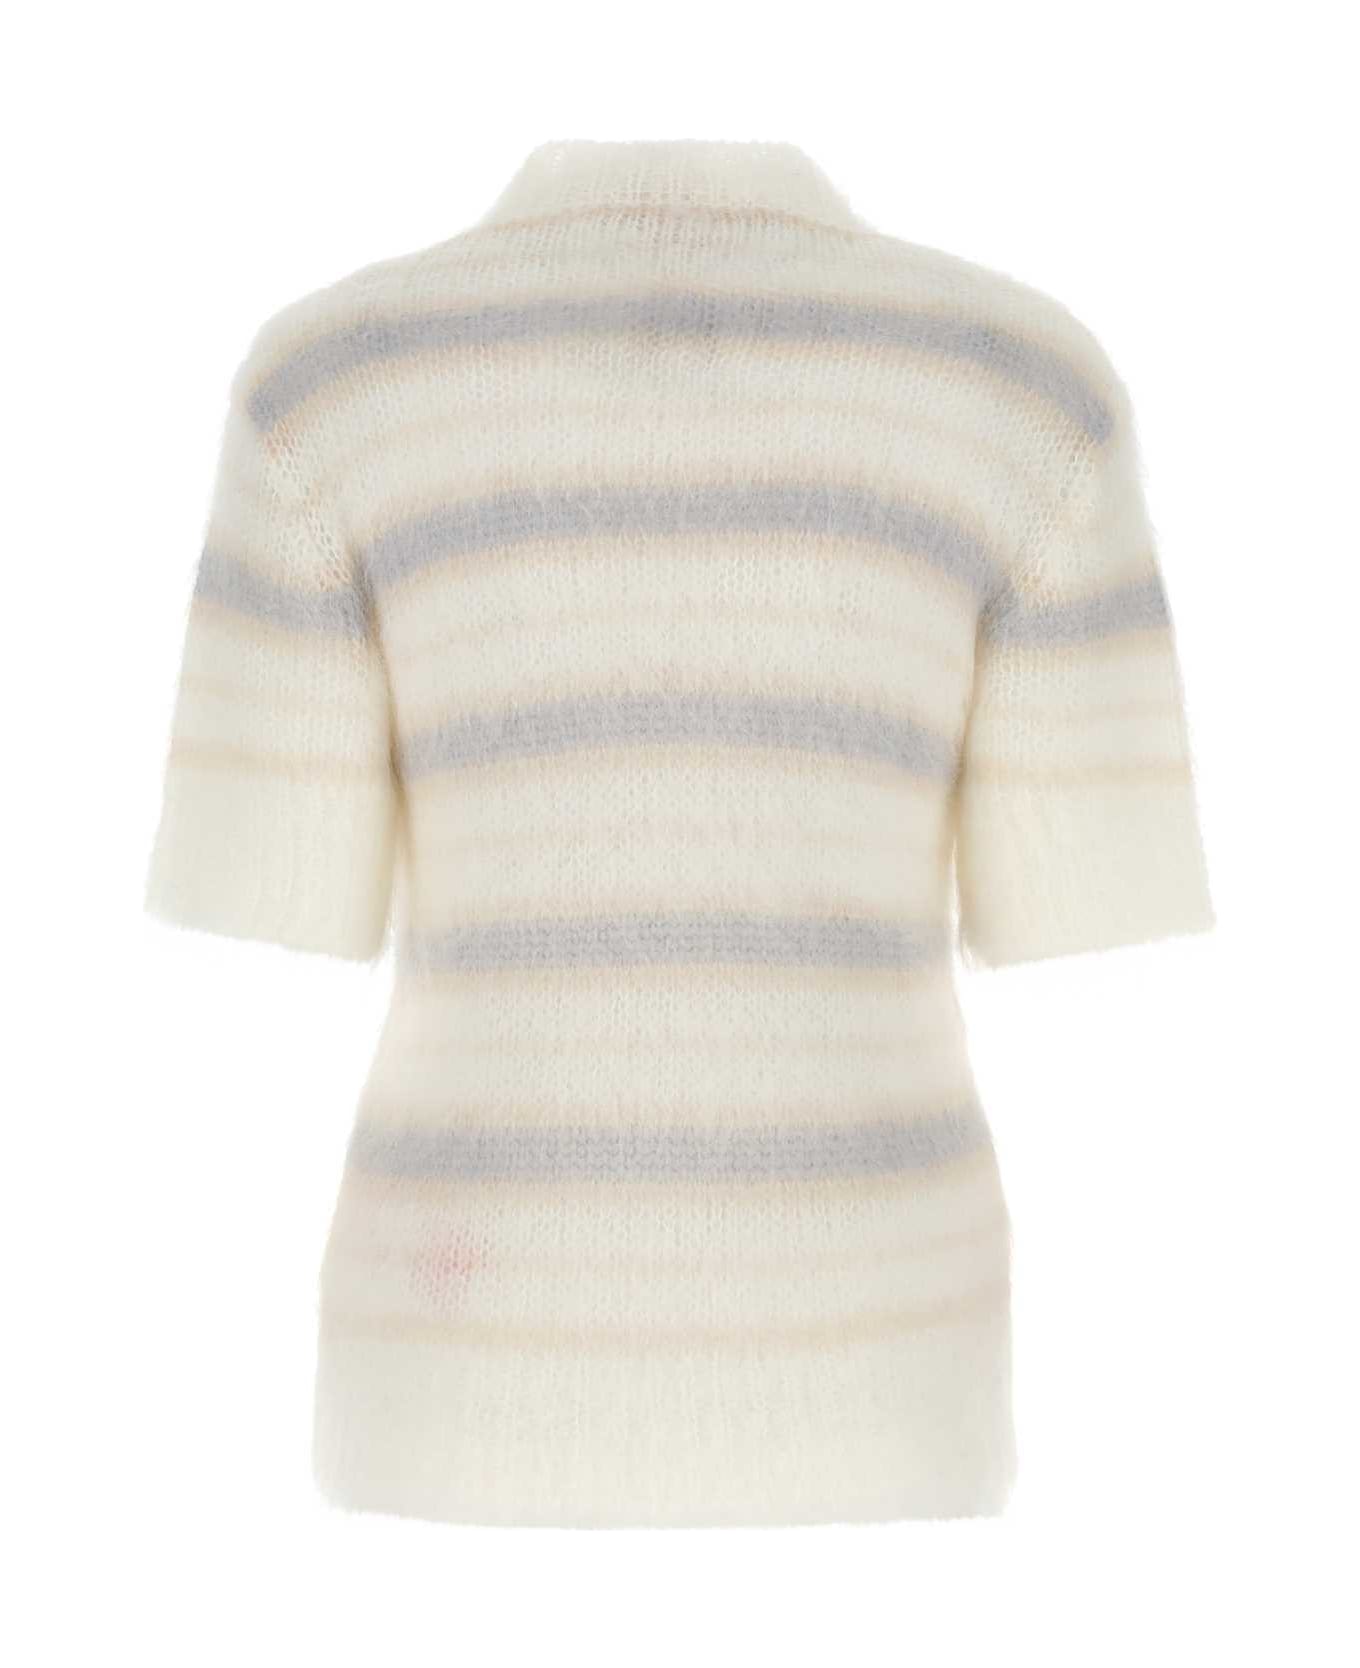 Marni Embroidered Mohair Blend Sweater - NATURALWHIITE ニットウェア